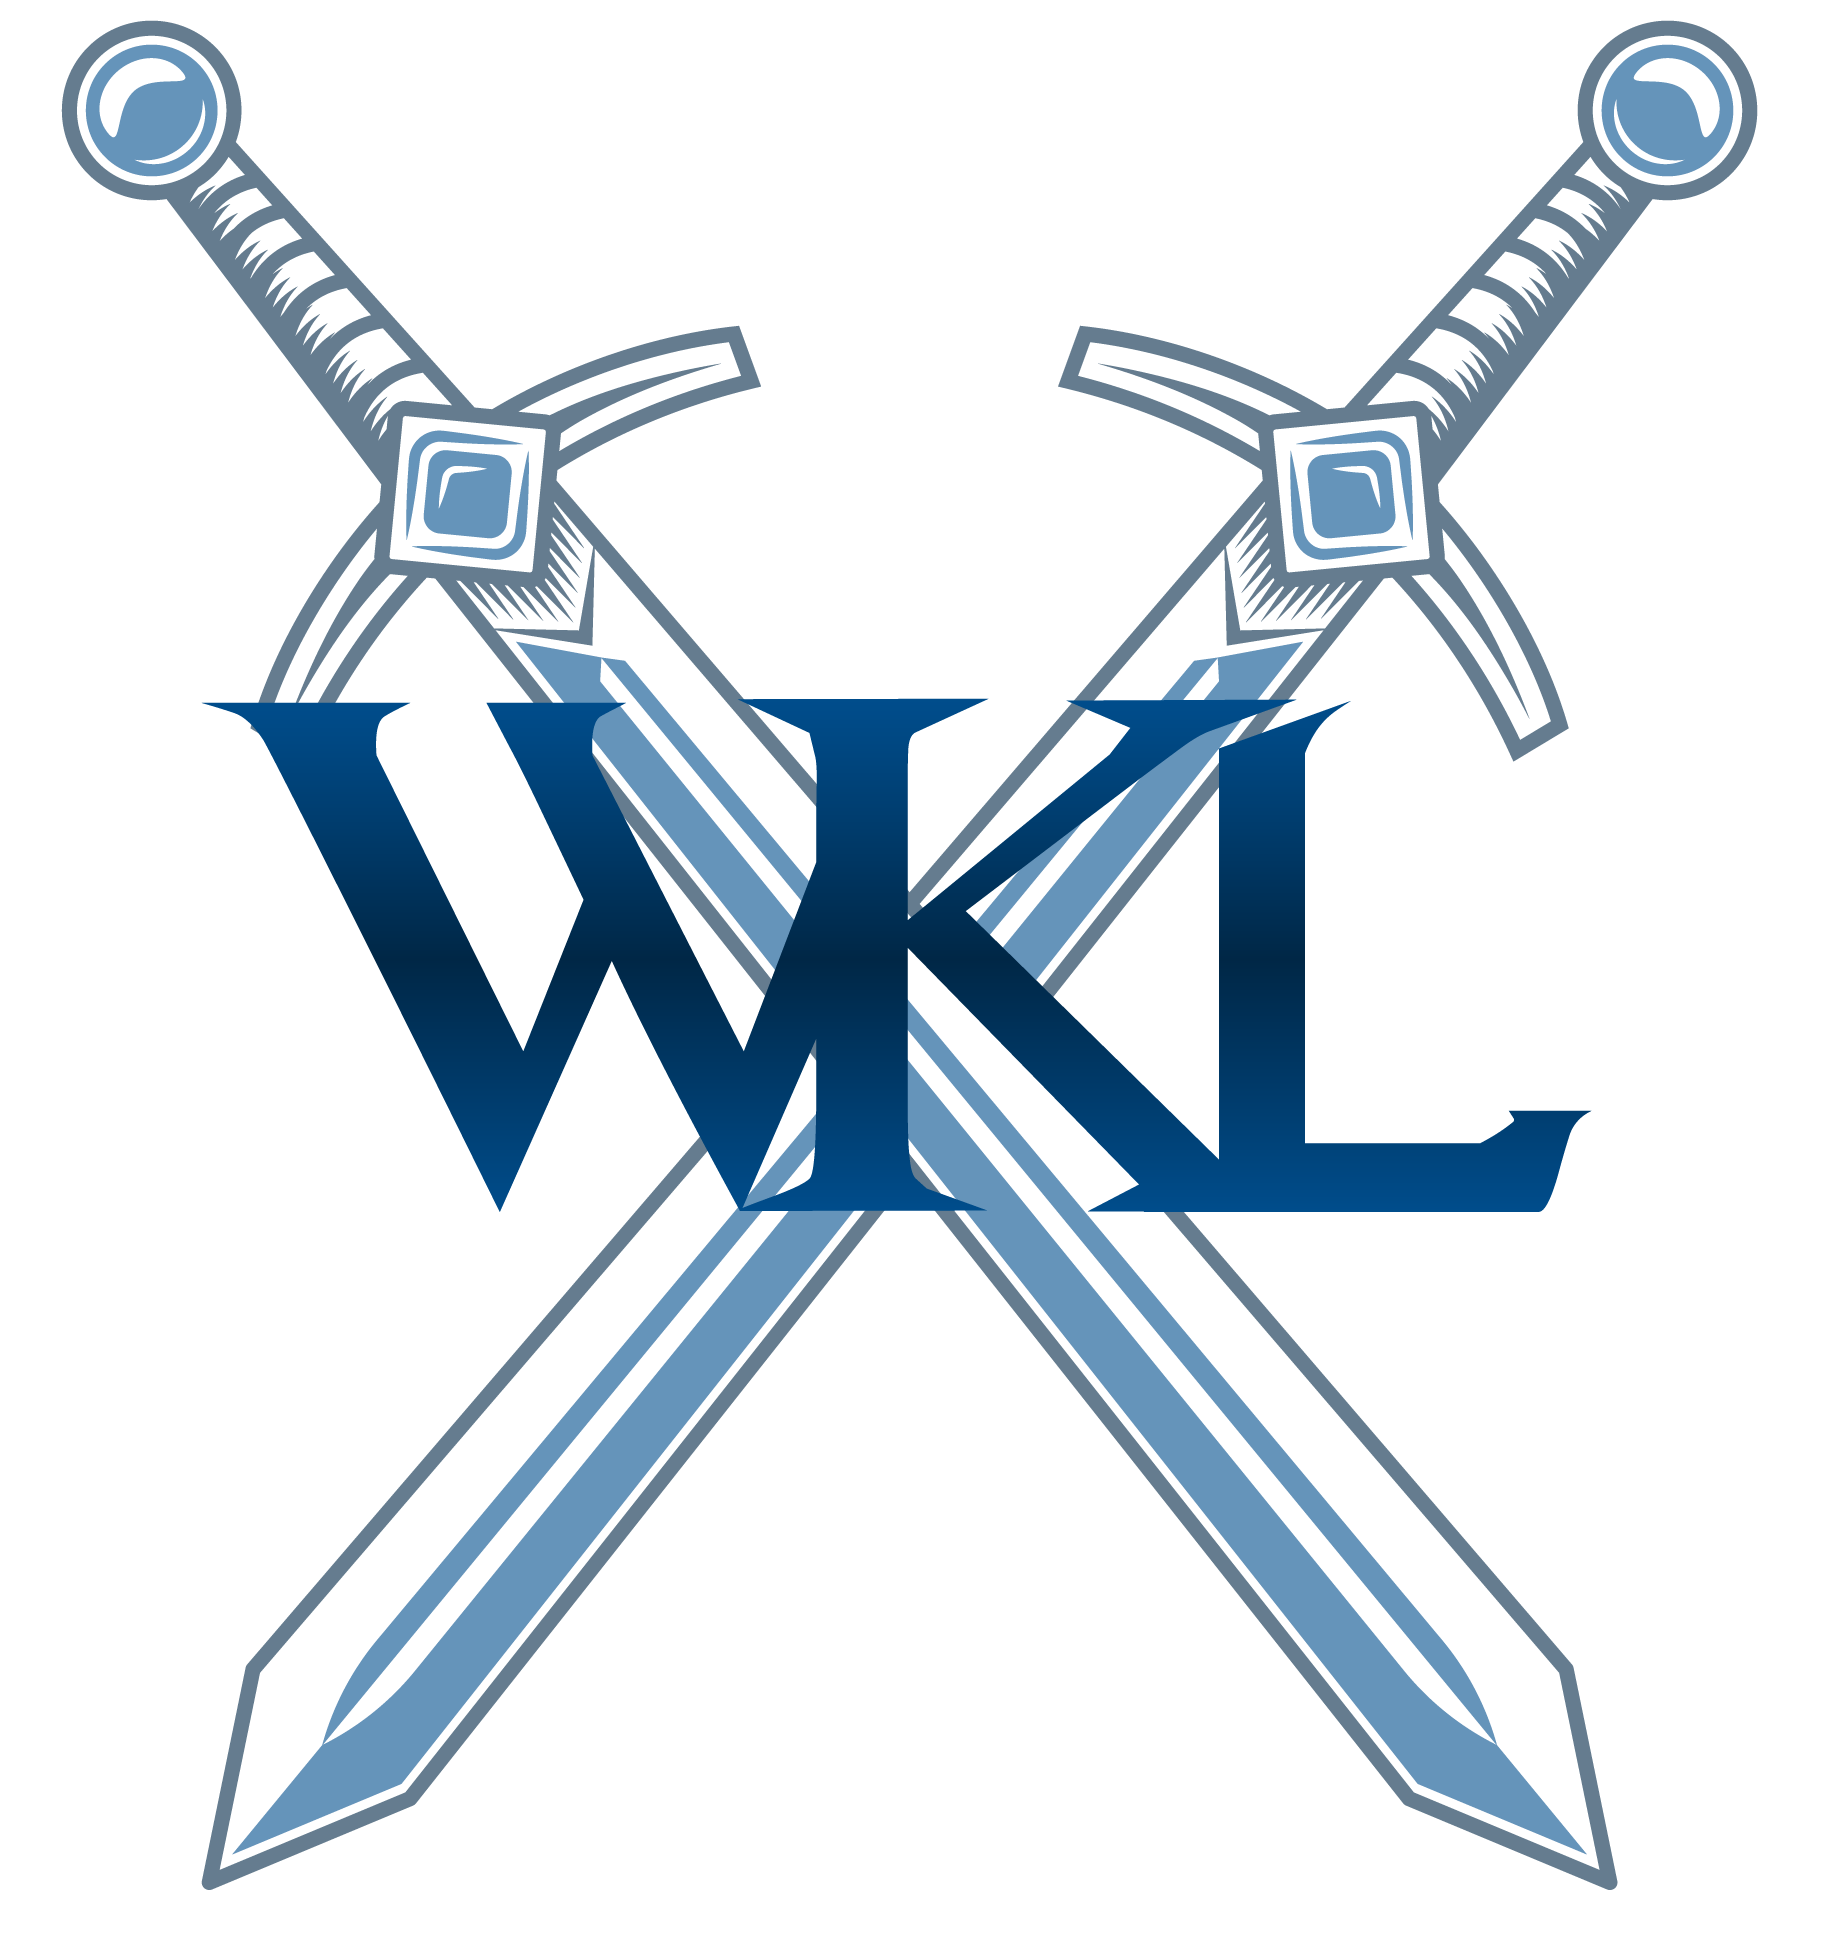 White Knight Labs logo of crossed swords and the WKL letters across the center